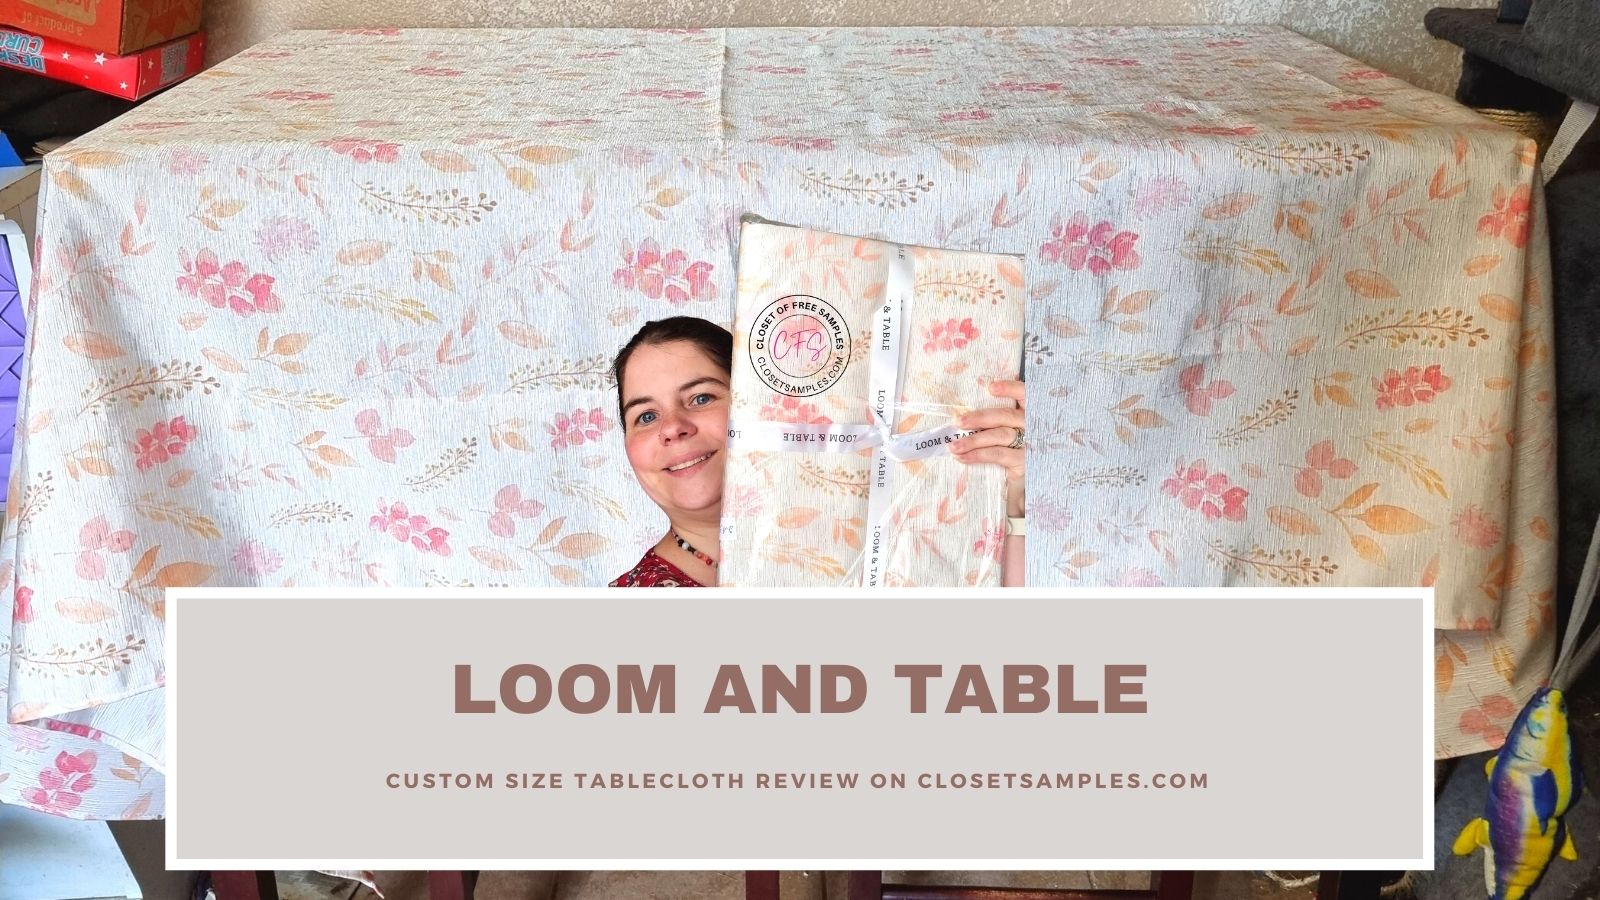 Loom and Table Custome Size Tablecloth Review